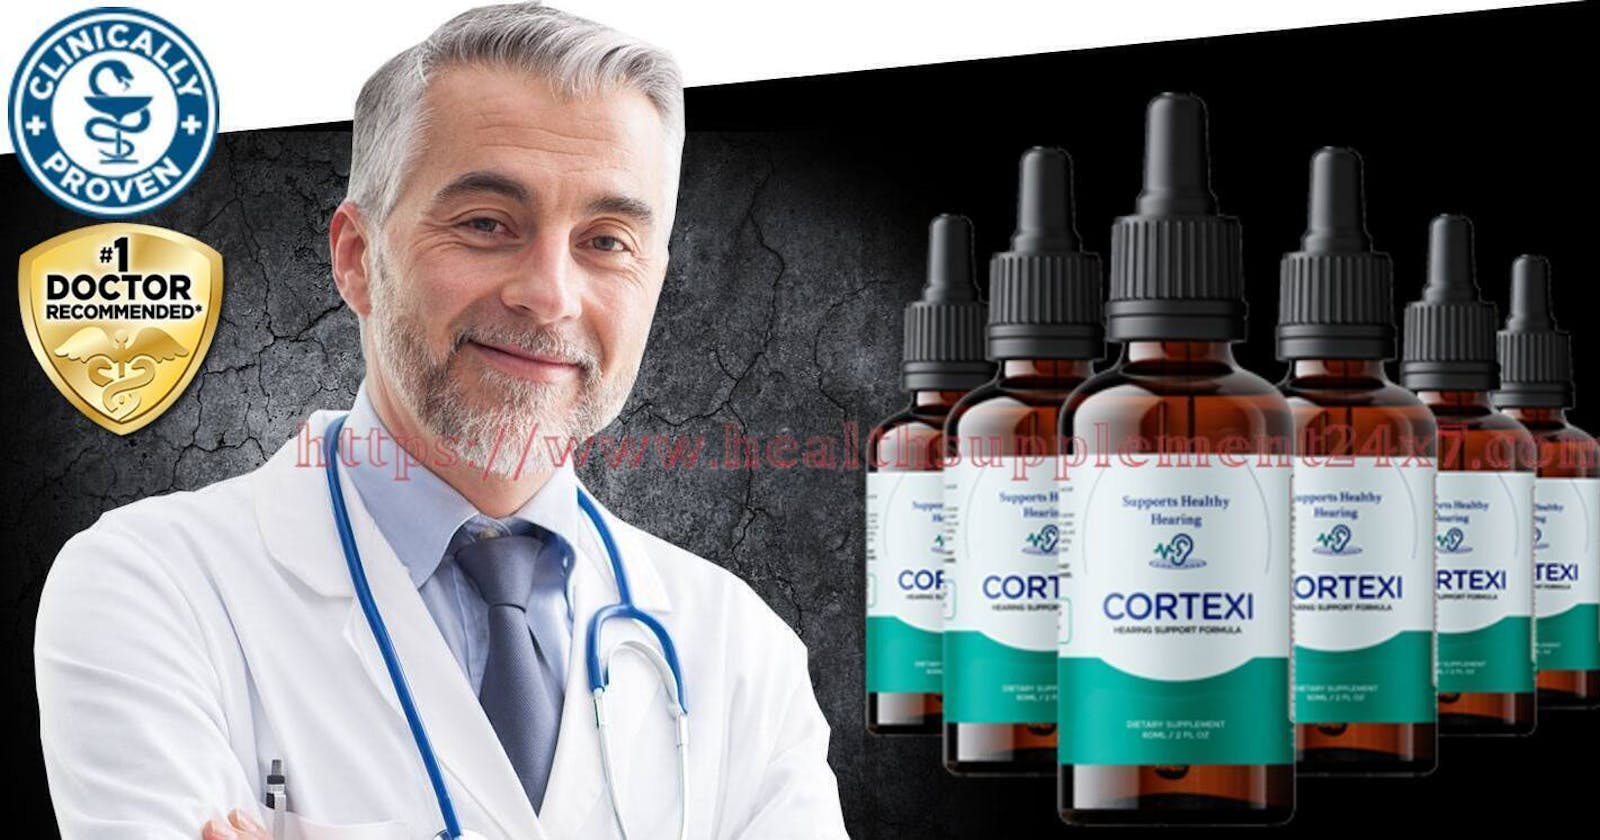 Cortexi Hearing Support Formula {Clinically Proven} Promotes Auditory Clarity Most Worth It For Hearing Health And Tinnitus(REAL OR HOAX)